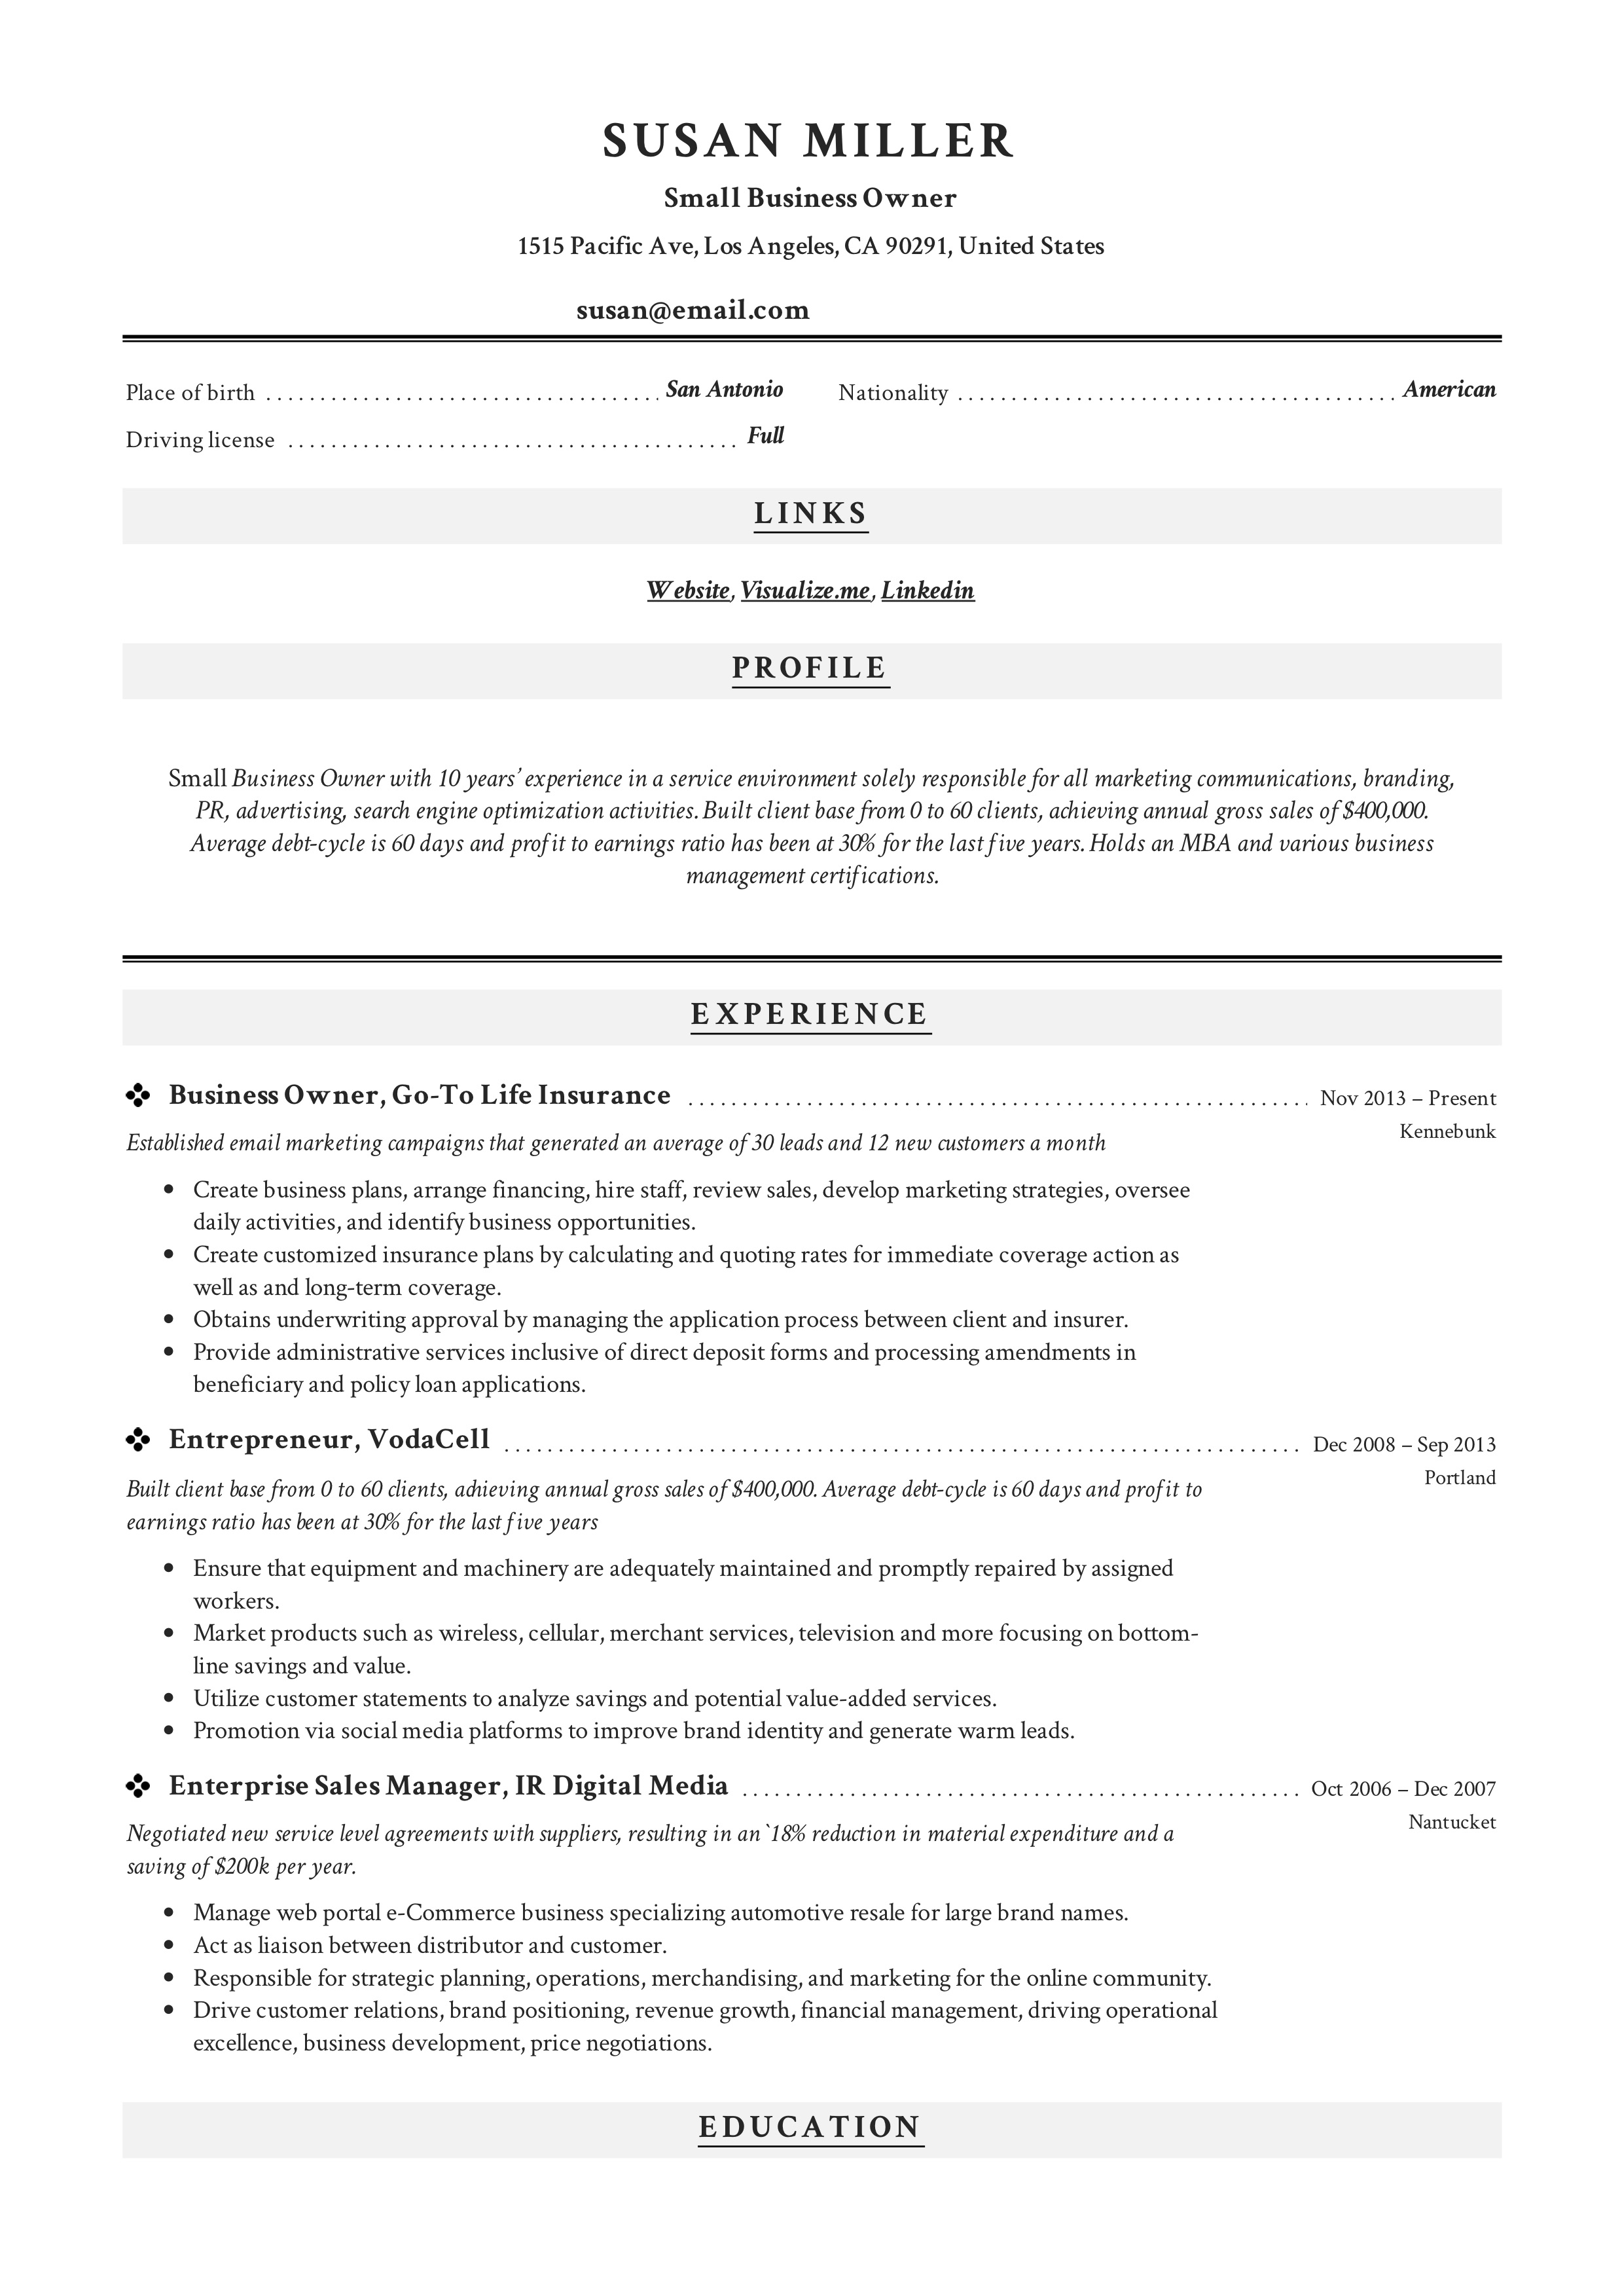 Small Business Owner Sample Resume